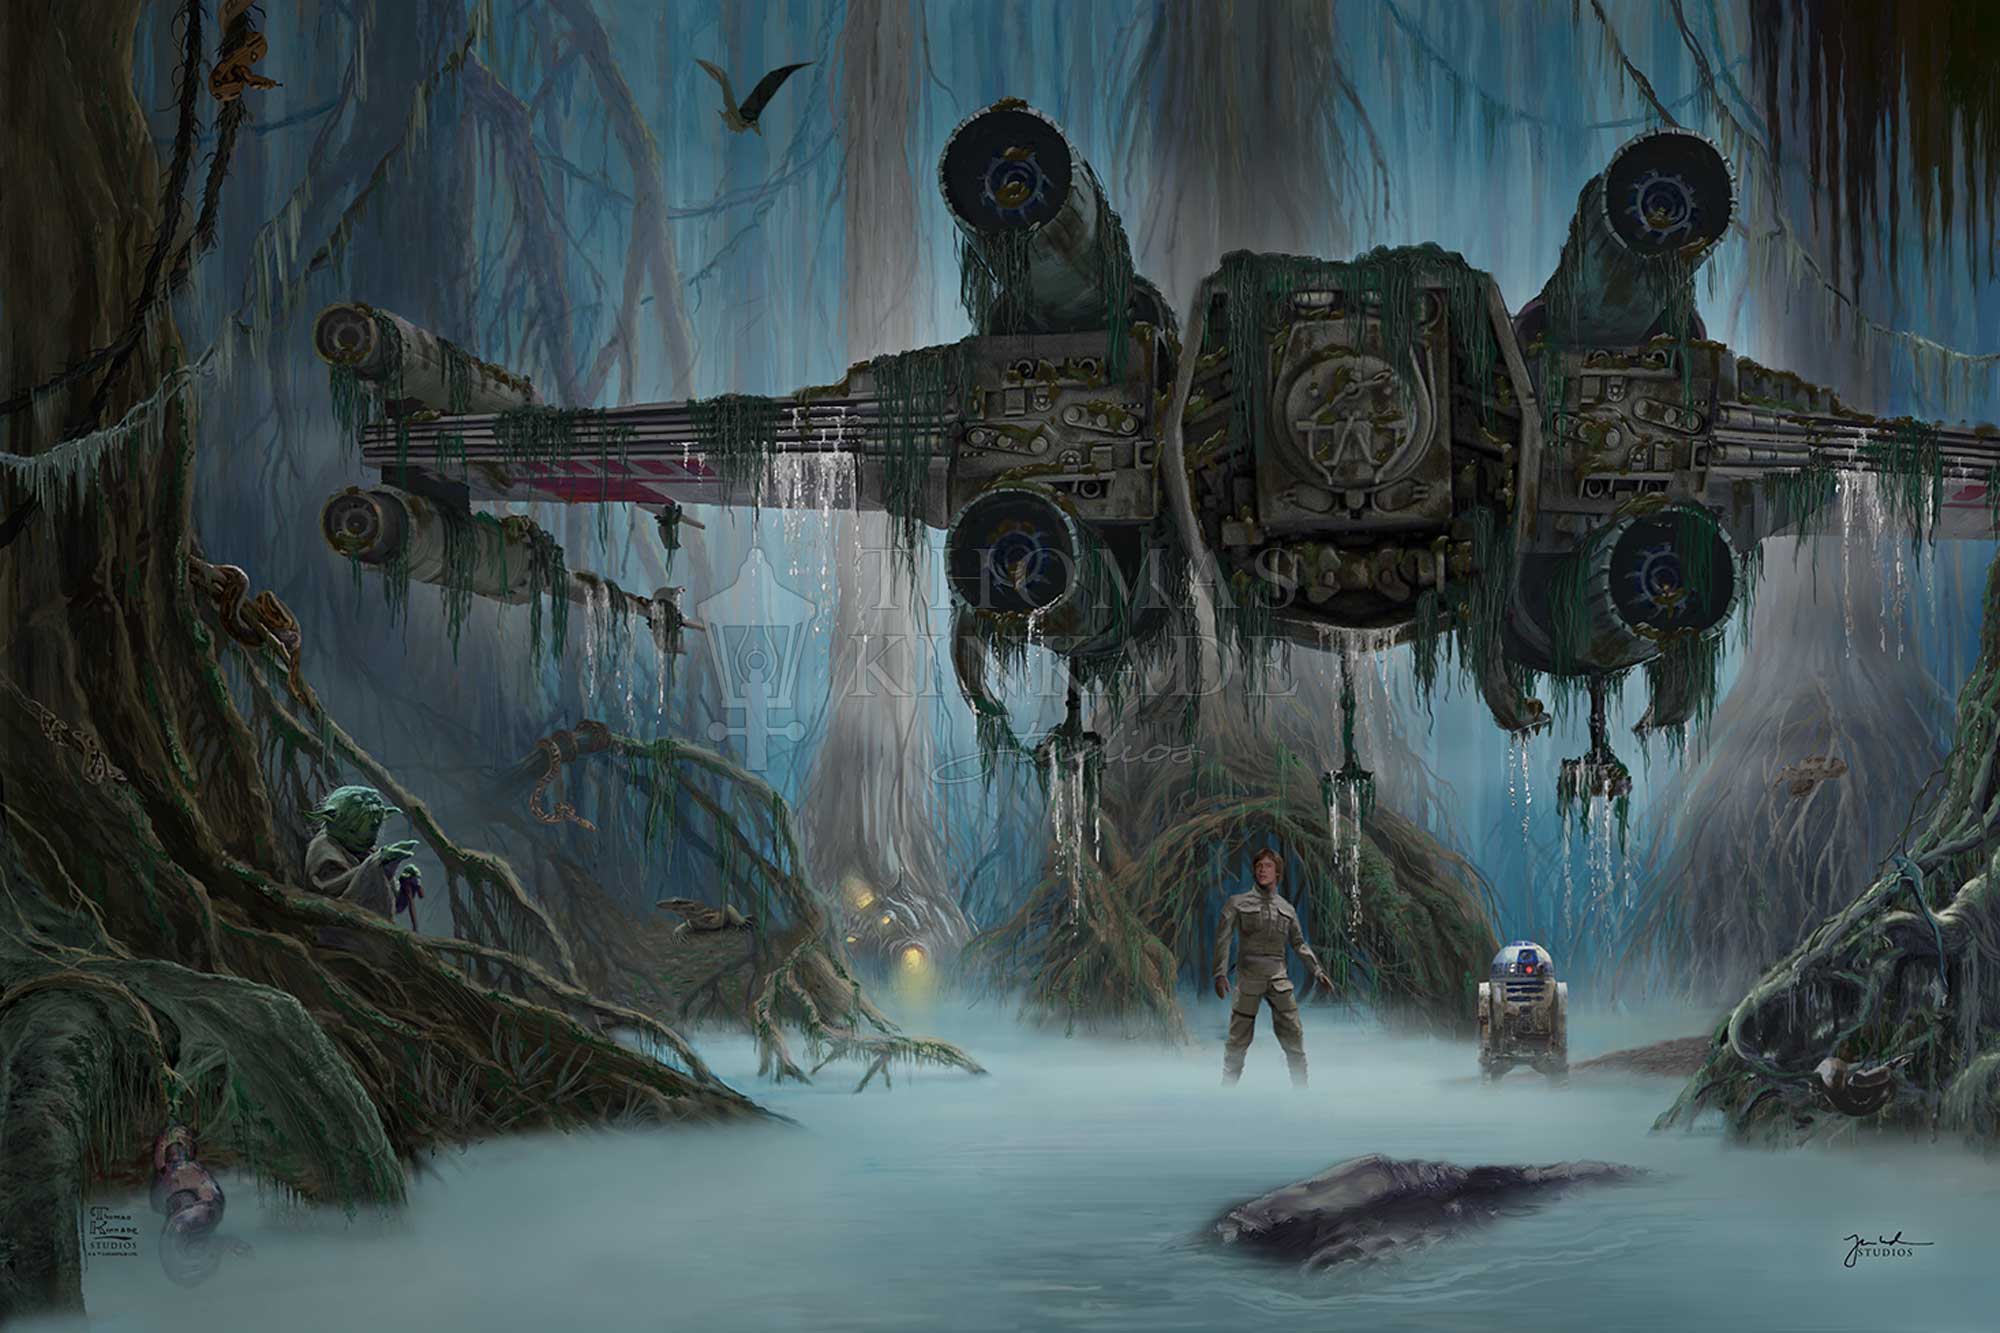 Features Luke Skywalker and Yoda in Dagobah a swamp-covered planet. Artwork inspired by Star Wars: The Empire Strikes Back.